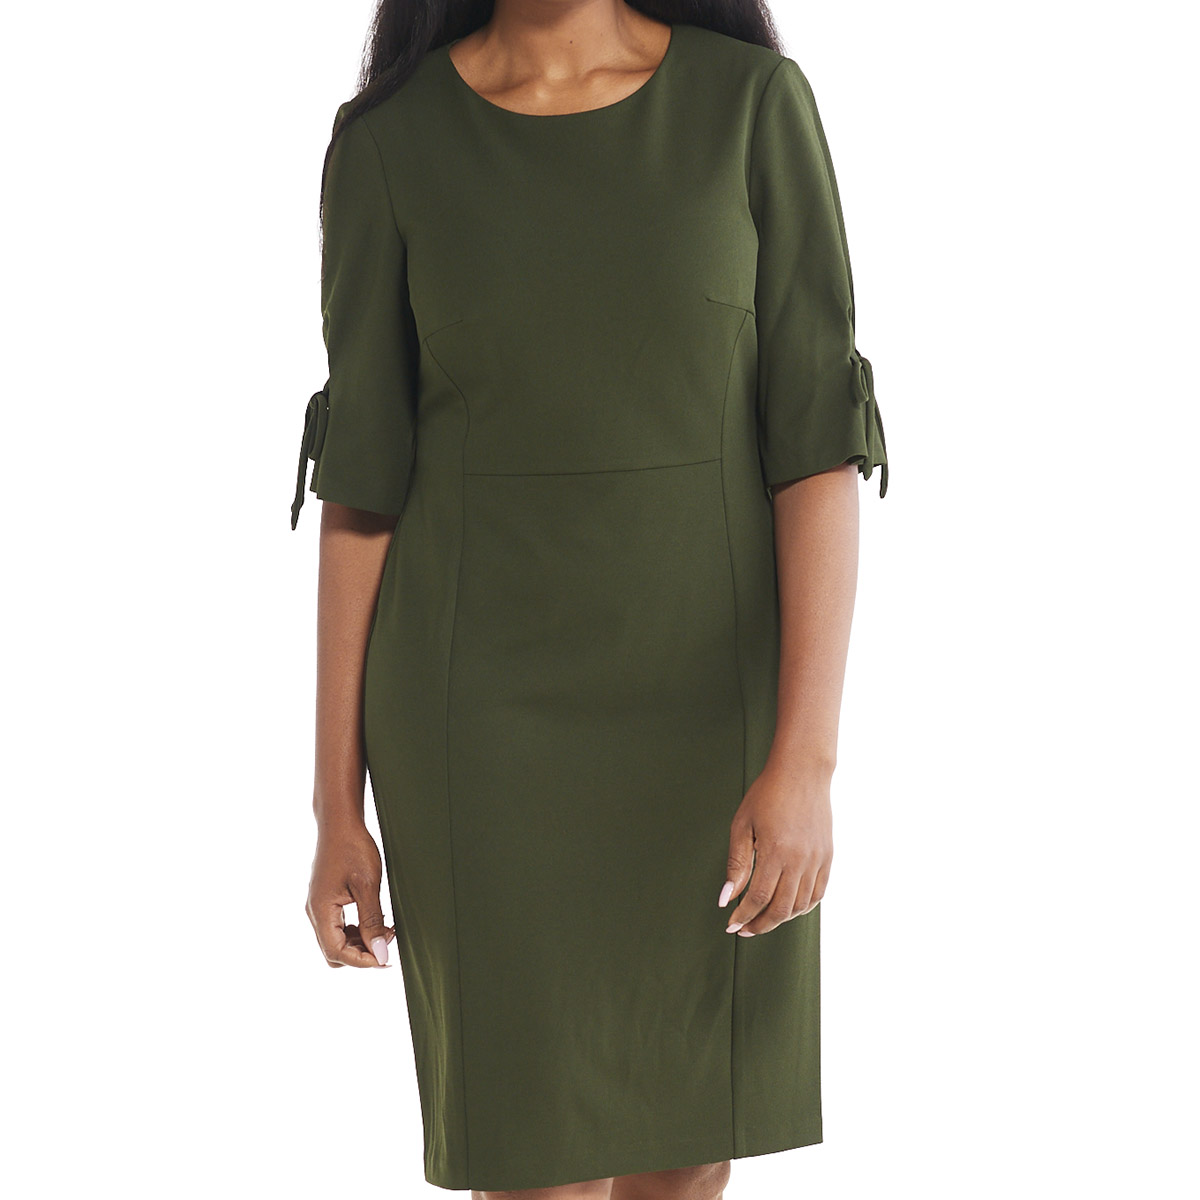 Womens Connected Apparel Tie Sleeve Solid Crepe Sheath Dress